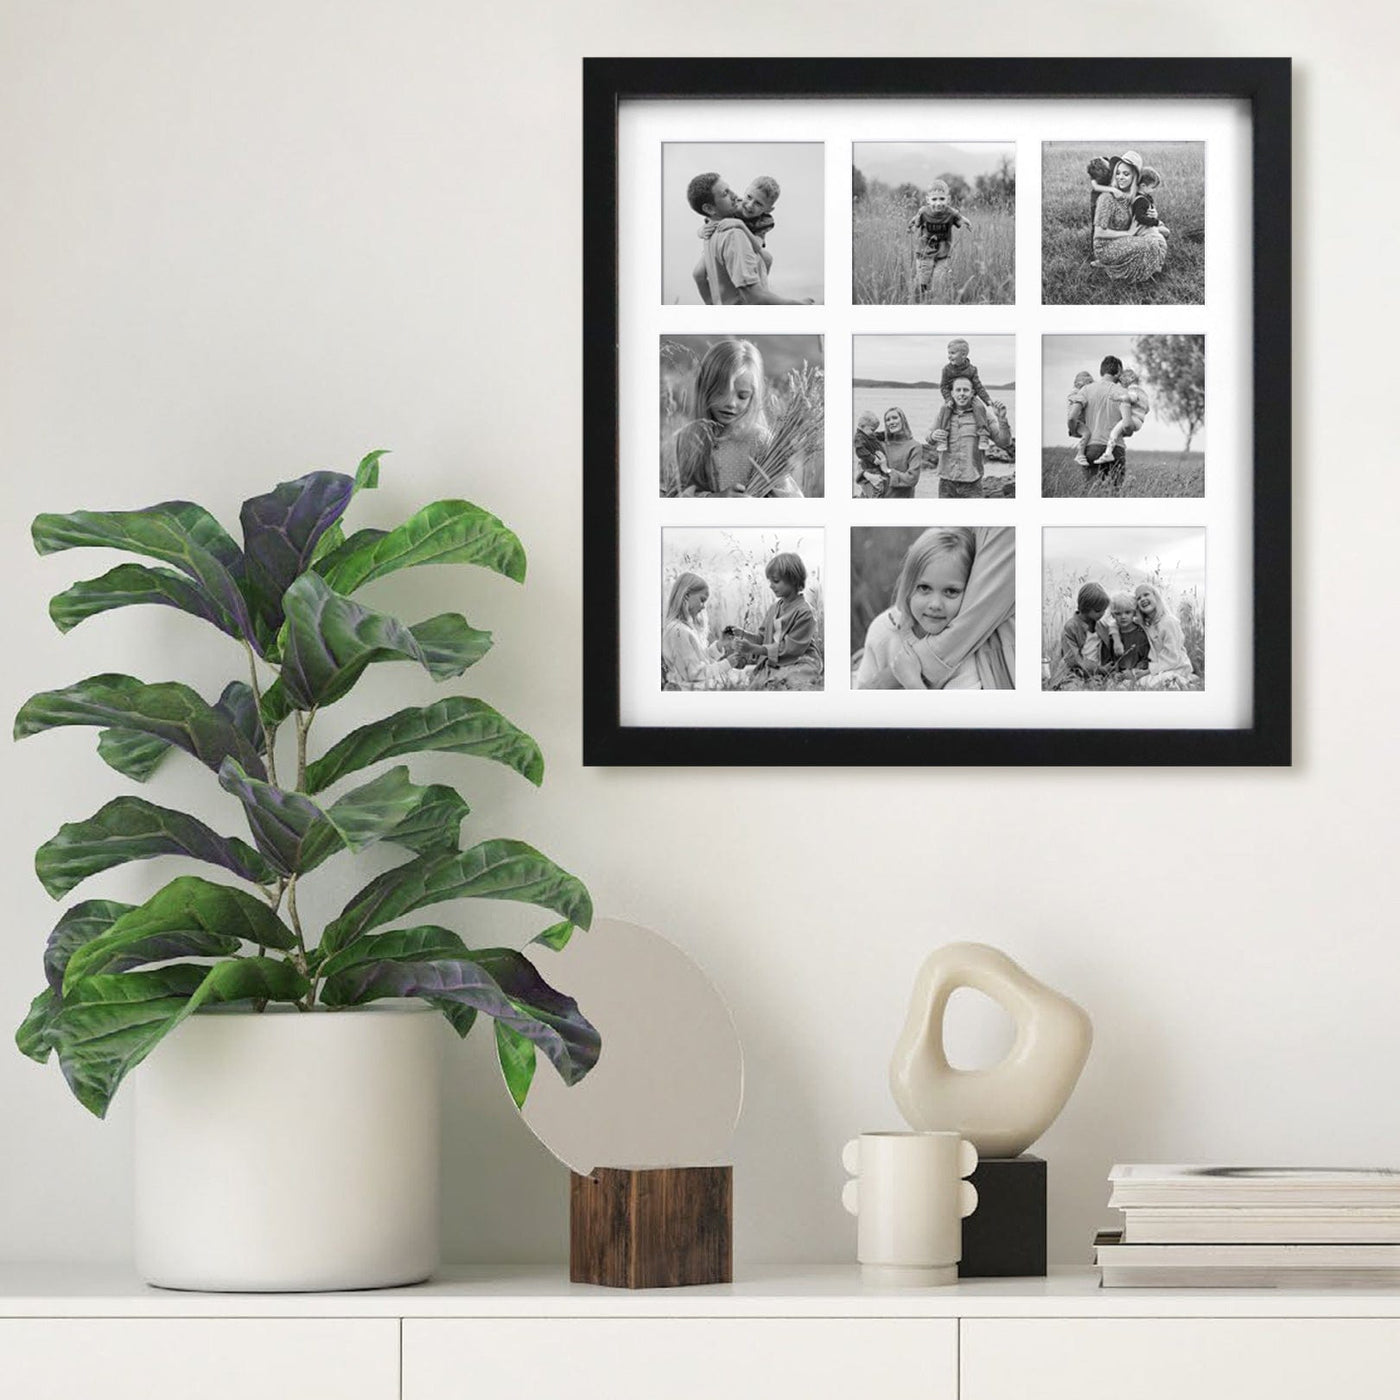 Elegant Insta Square Collage Photo Frame - 9 Photos (2.5x2.5in) from our Australian Made Collage Photo Frame collection by Profile Products Australia